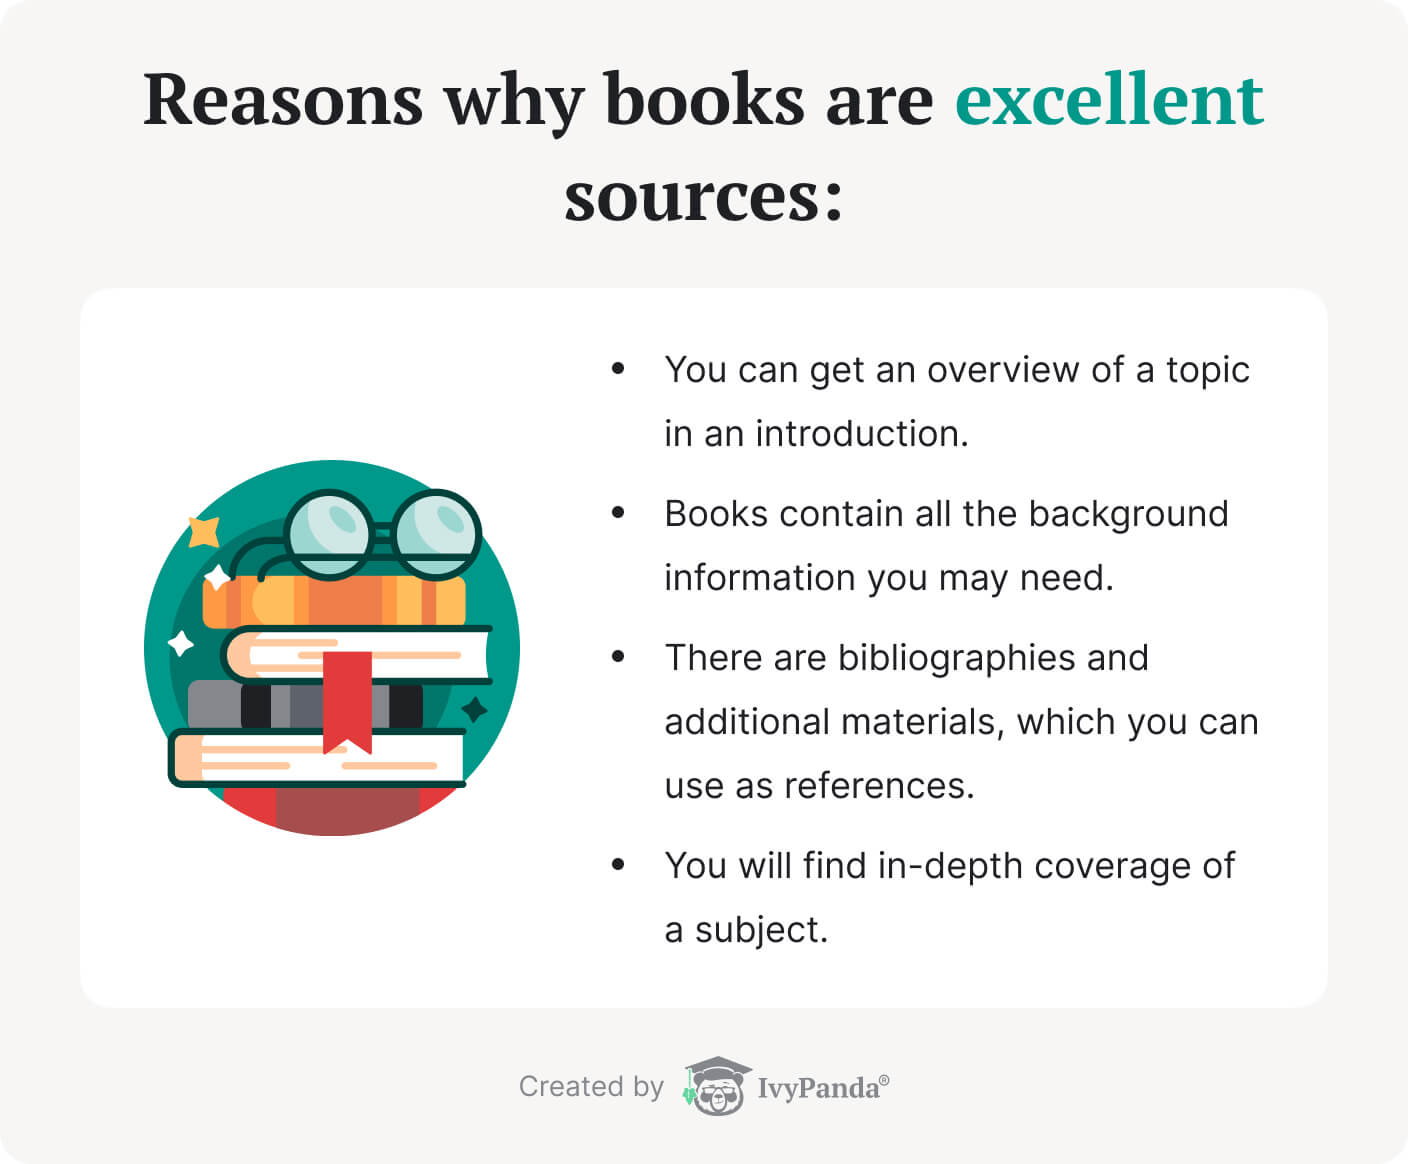 Reasons to use books as sources.